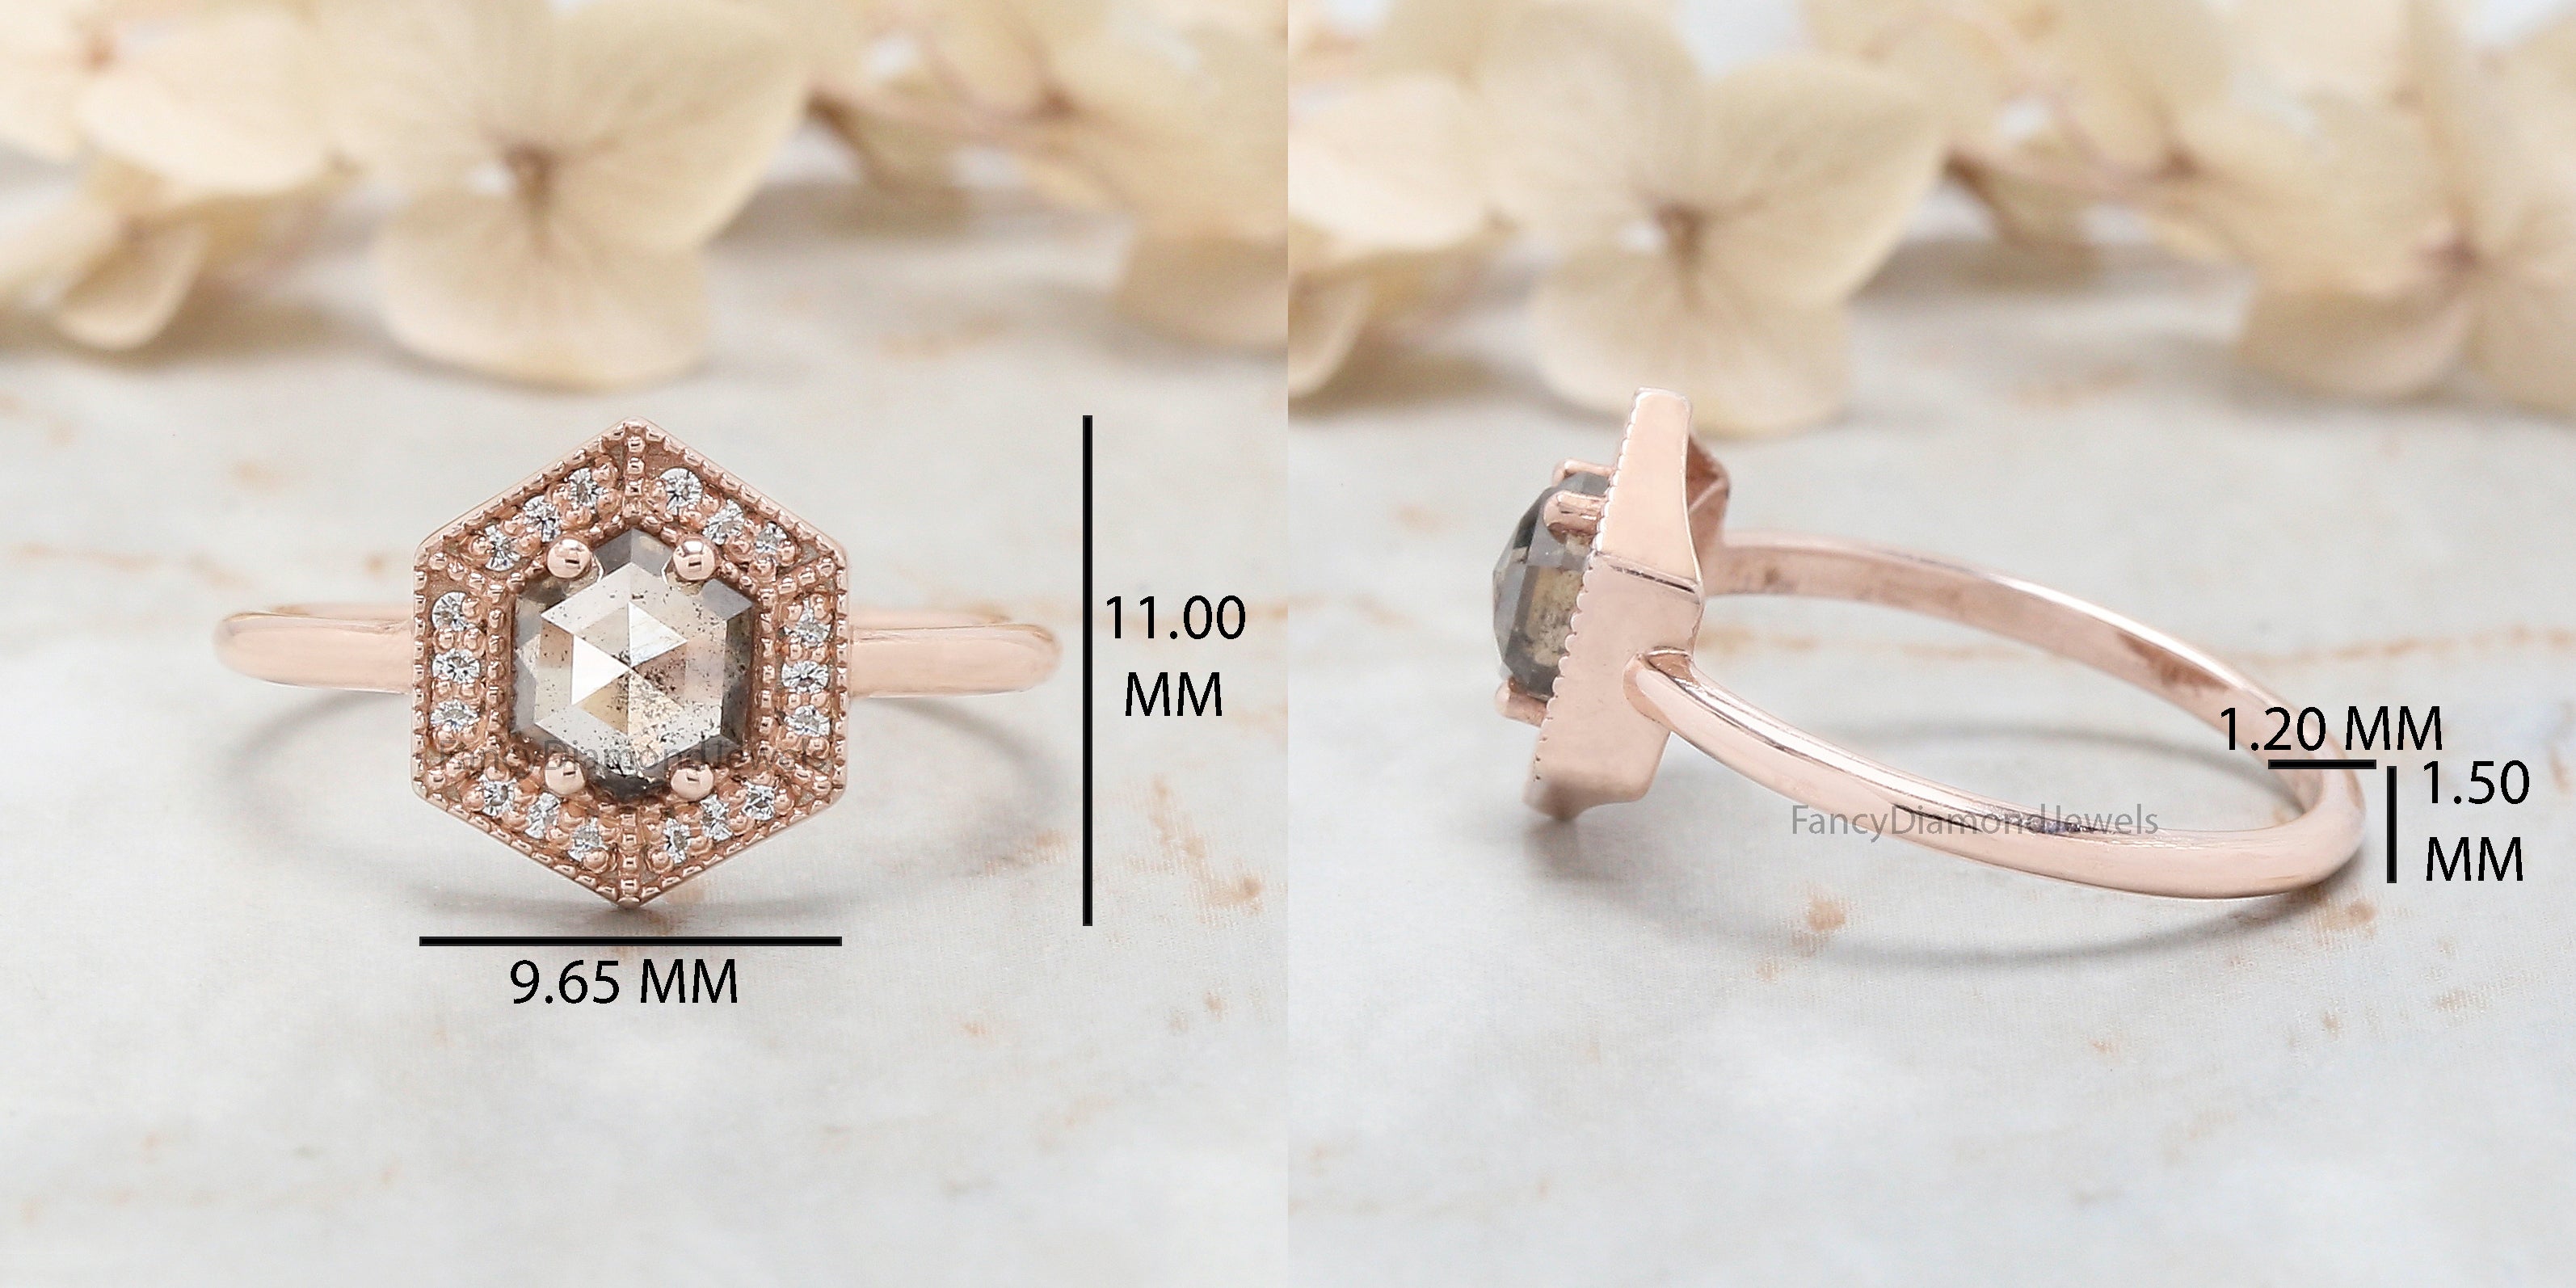 Hexagon Cut Salt And Pepper Diamond Ring 0.77 Ct 5.94 MM Hexagon Diamond Ring 14K Solid Rose Gold Silver Engagement Ring Gift For Her QL9543